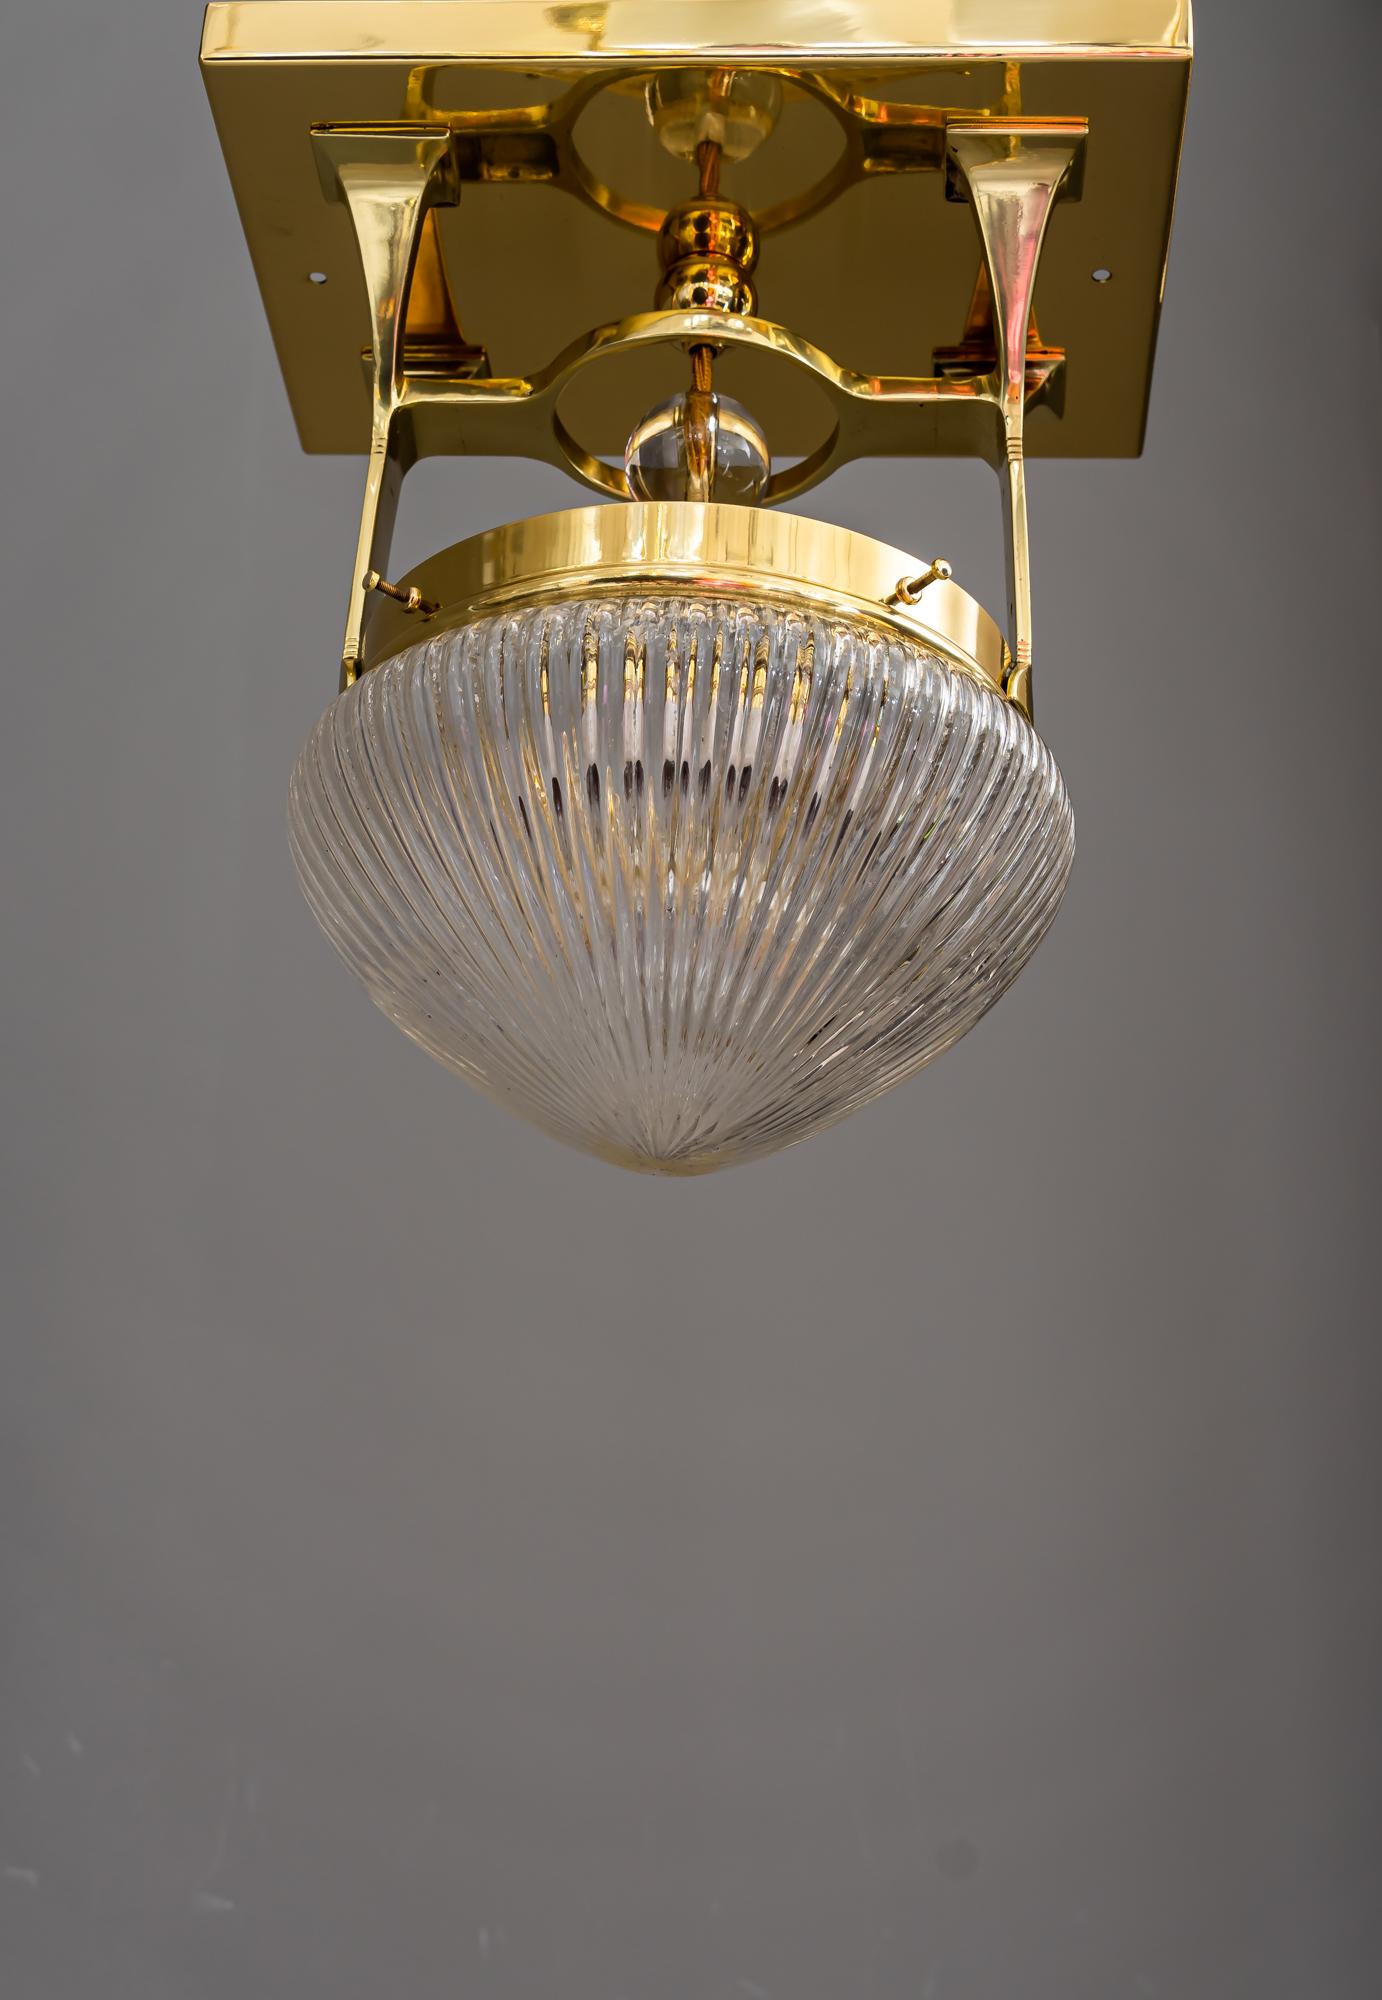 Polished Art Deco Ceiling Lamp with Cut Glass Vienna Around 1920s